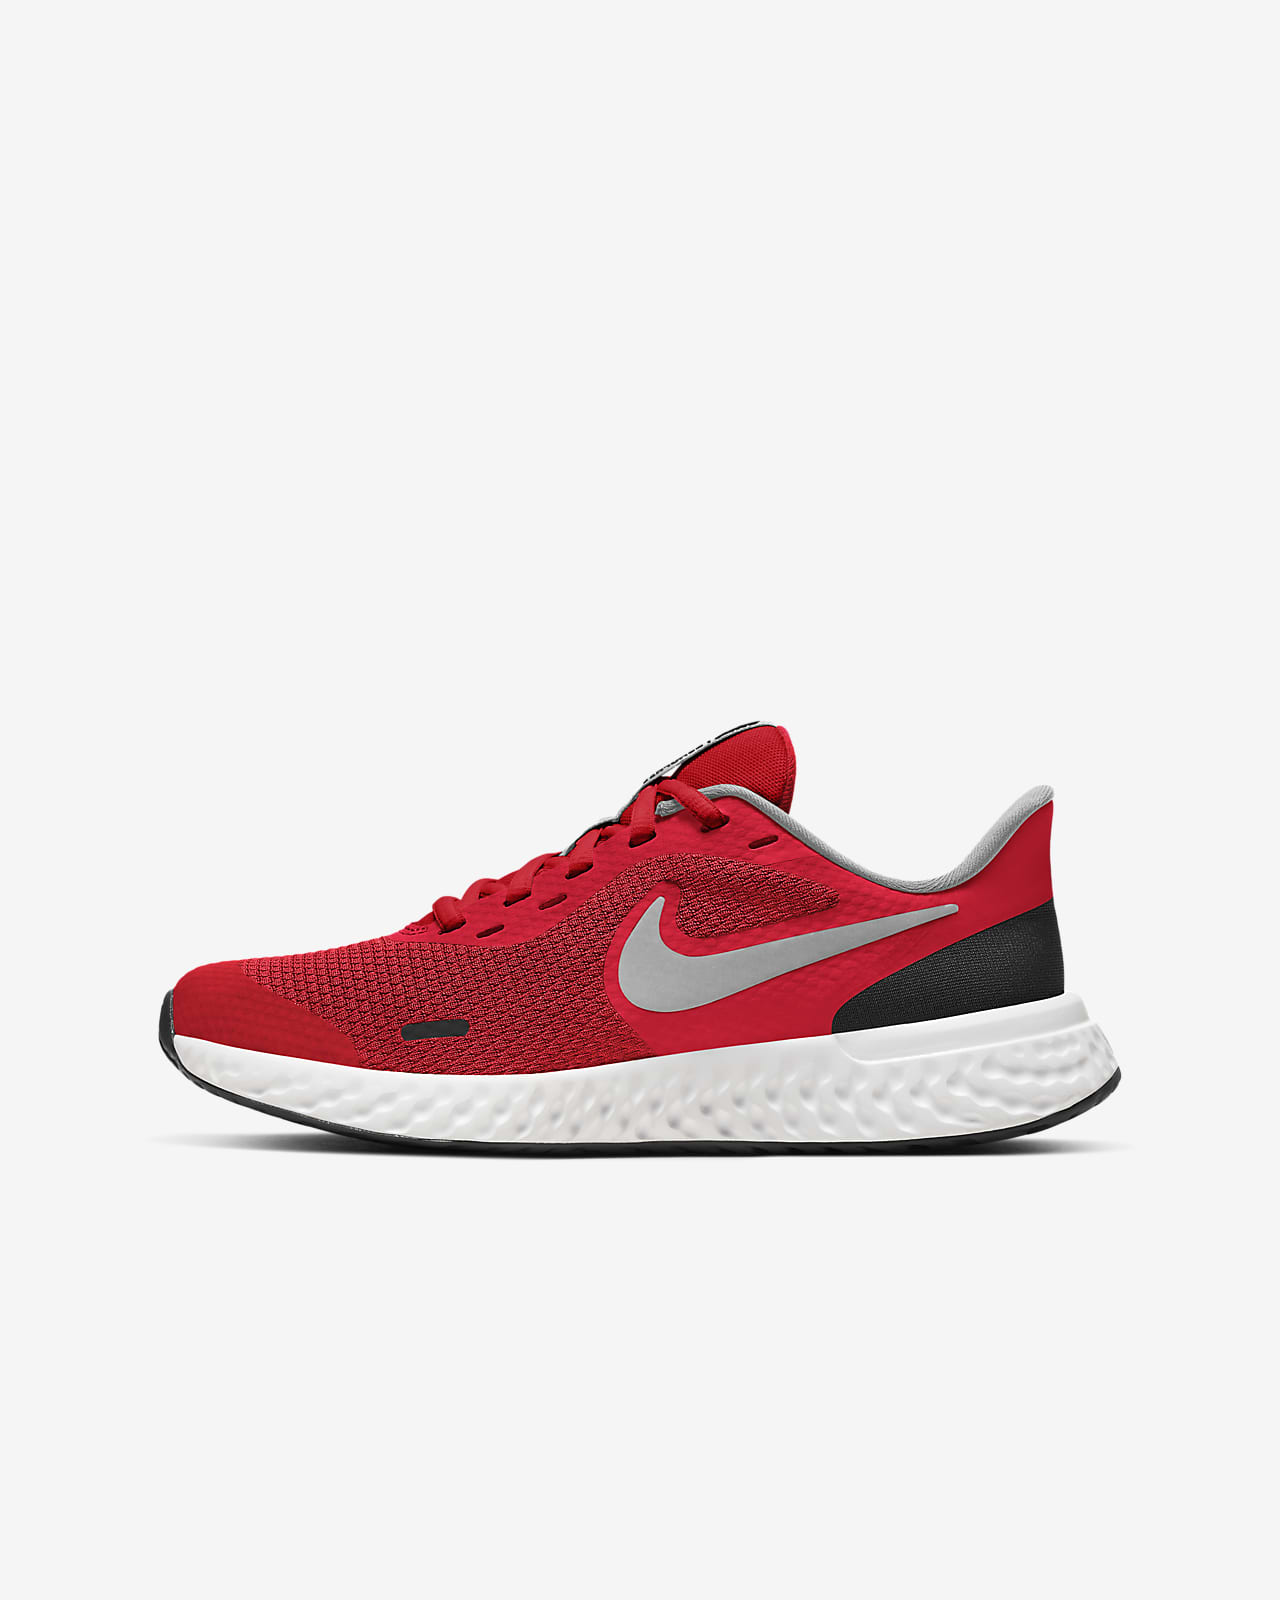 red youth nike shoes